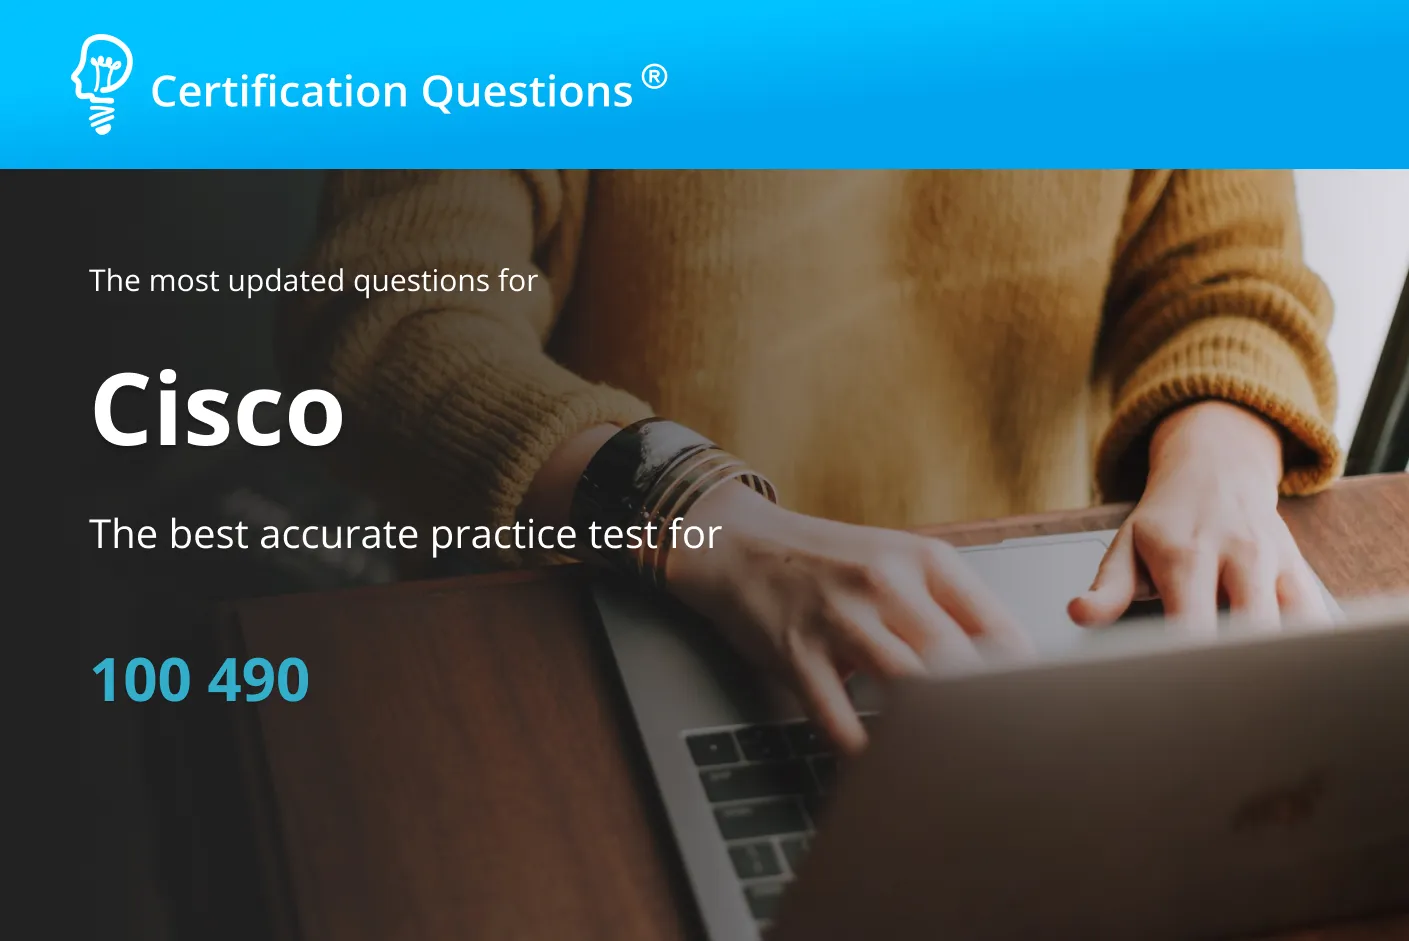 This image is related to Cisco CCT Practice test  in USA